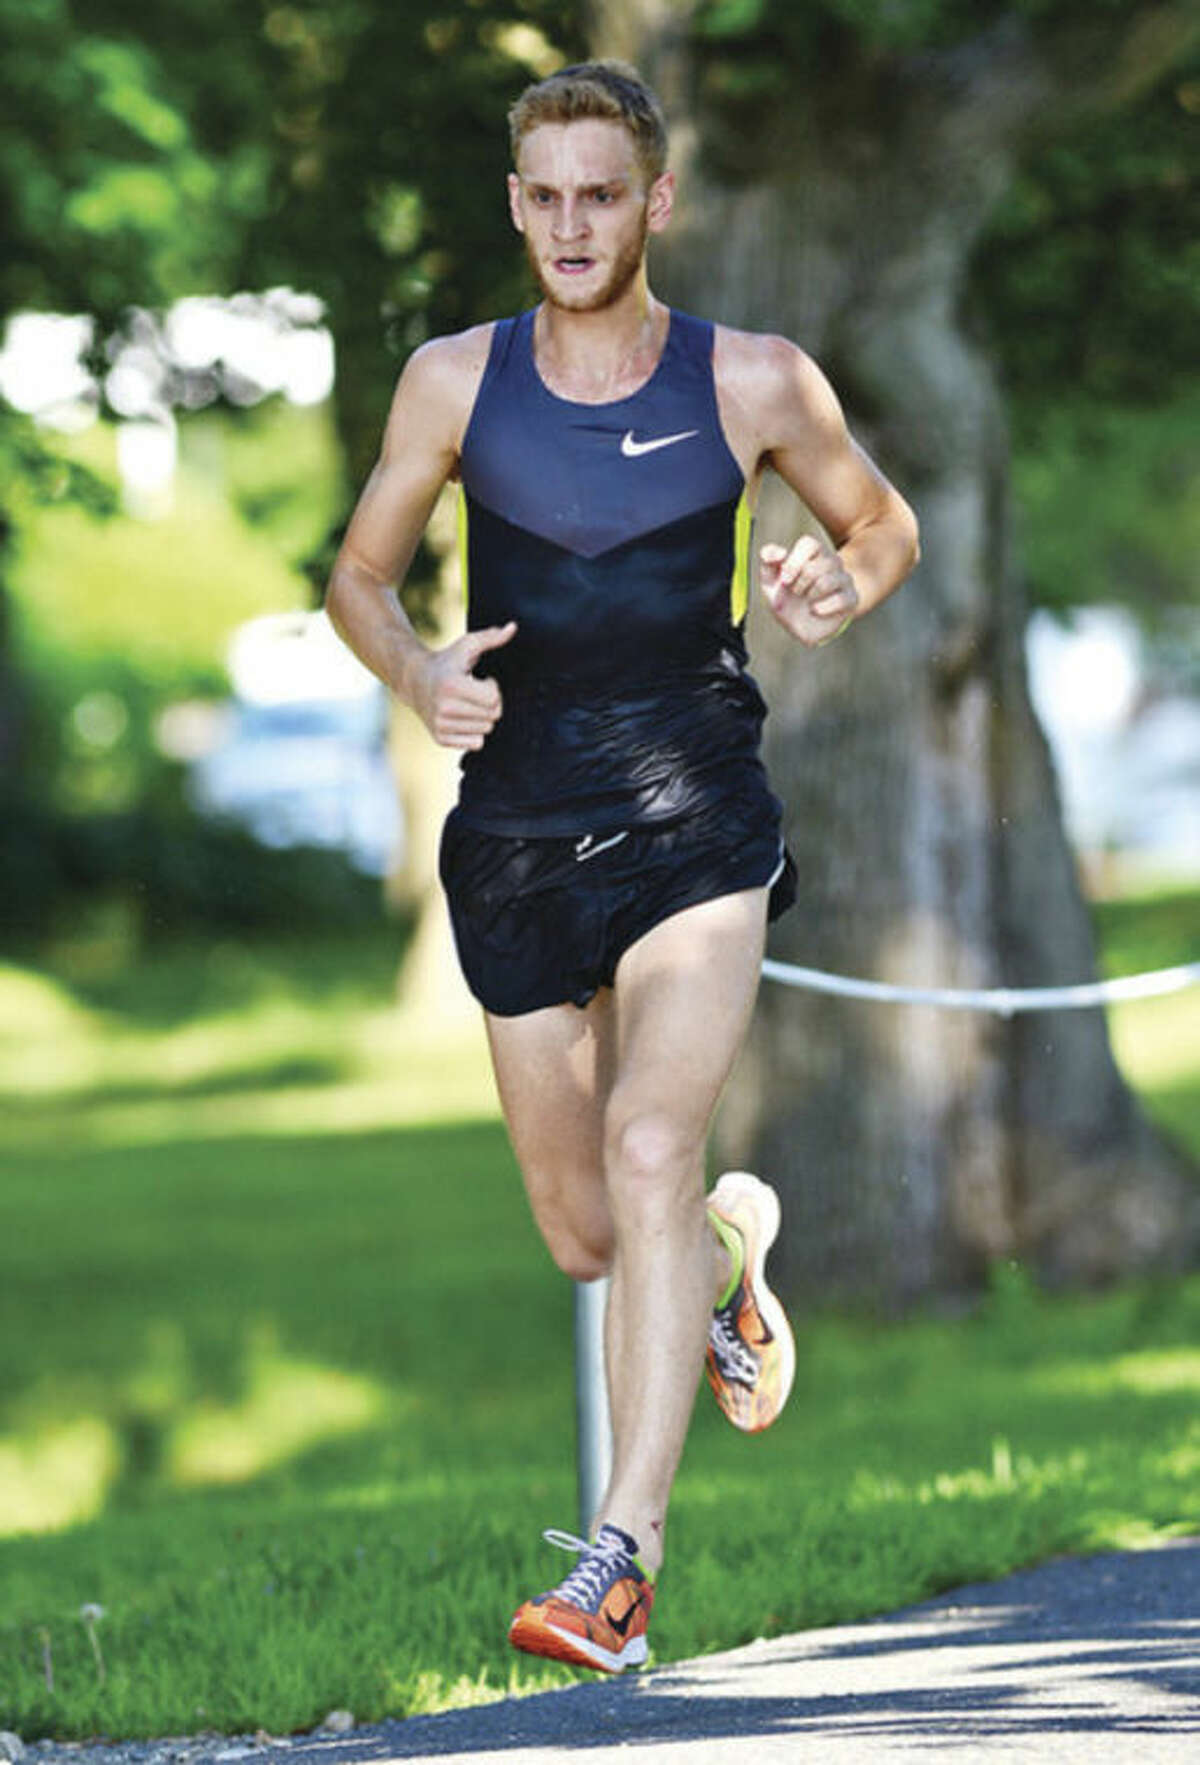 Hour photo/Erik Trautmann Luke McCambley is the first male finisher during the Westport Road Runners second race in a 10-race series at Longshore Park Saturday. Hour photo / Erik Trautmann